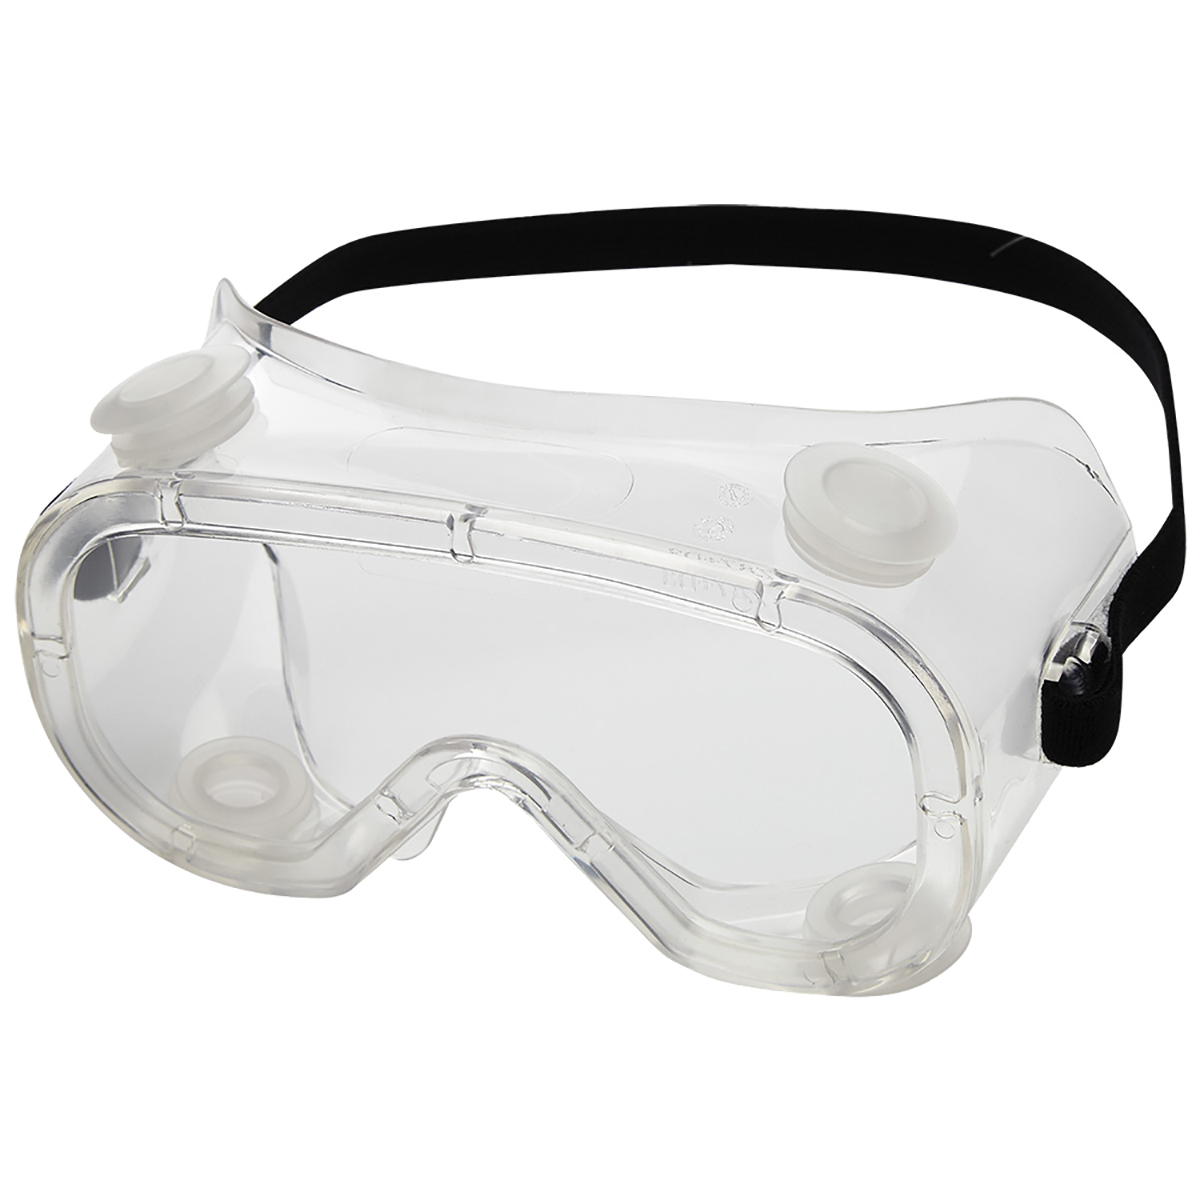 Sellstrom® Indirect Vent Chemical Splash Goggles With Clear Flexible Frame And Clear Anti-Fog Lens